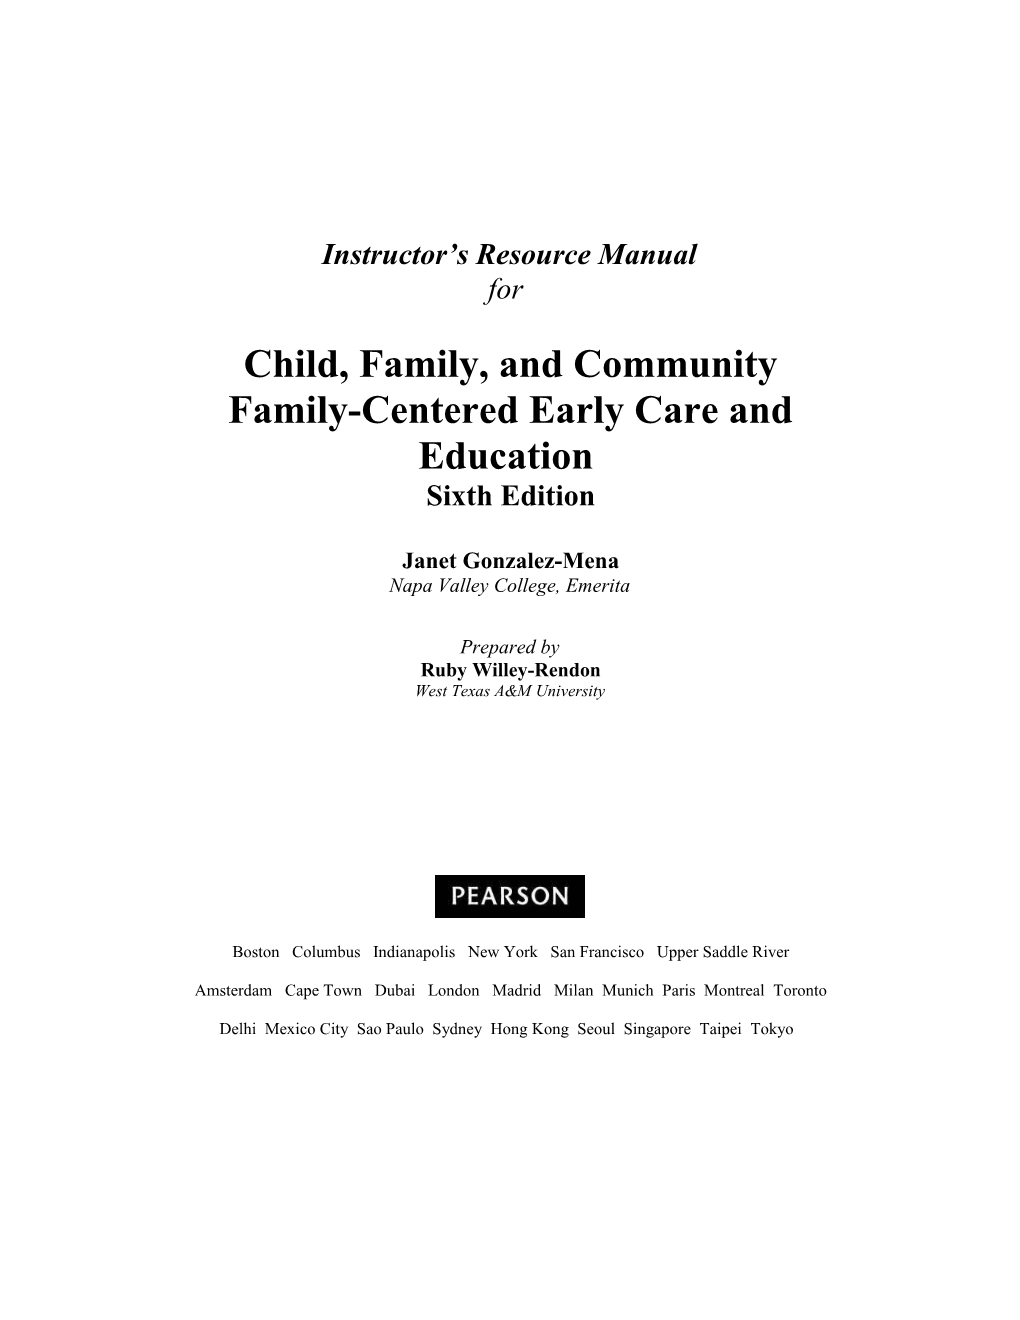 Child, Family, and Community